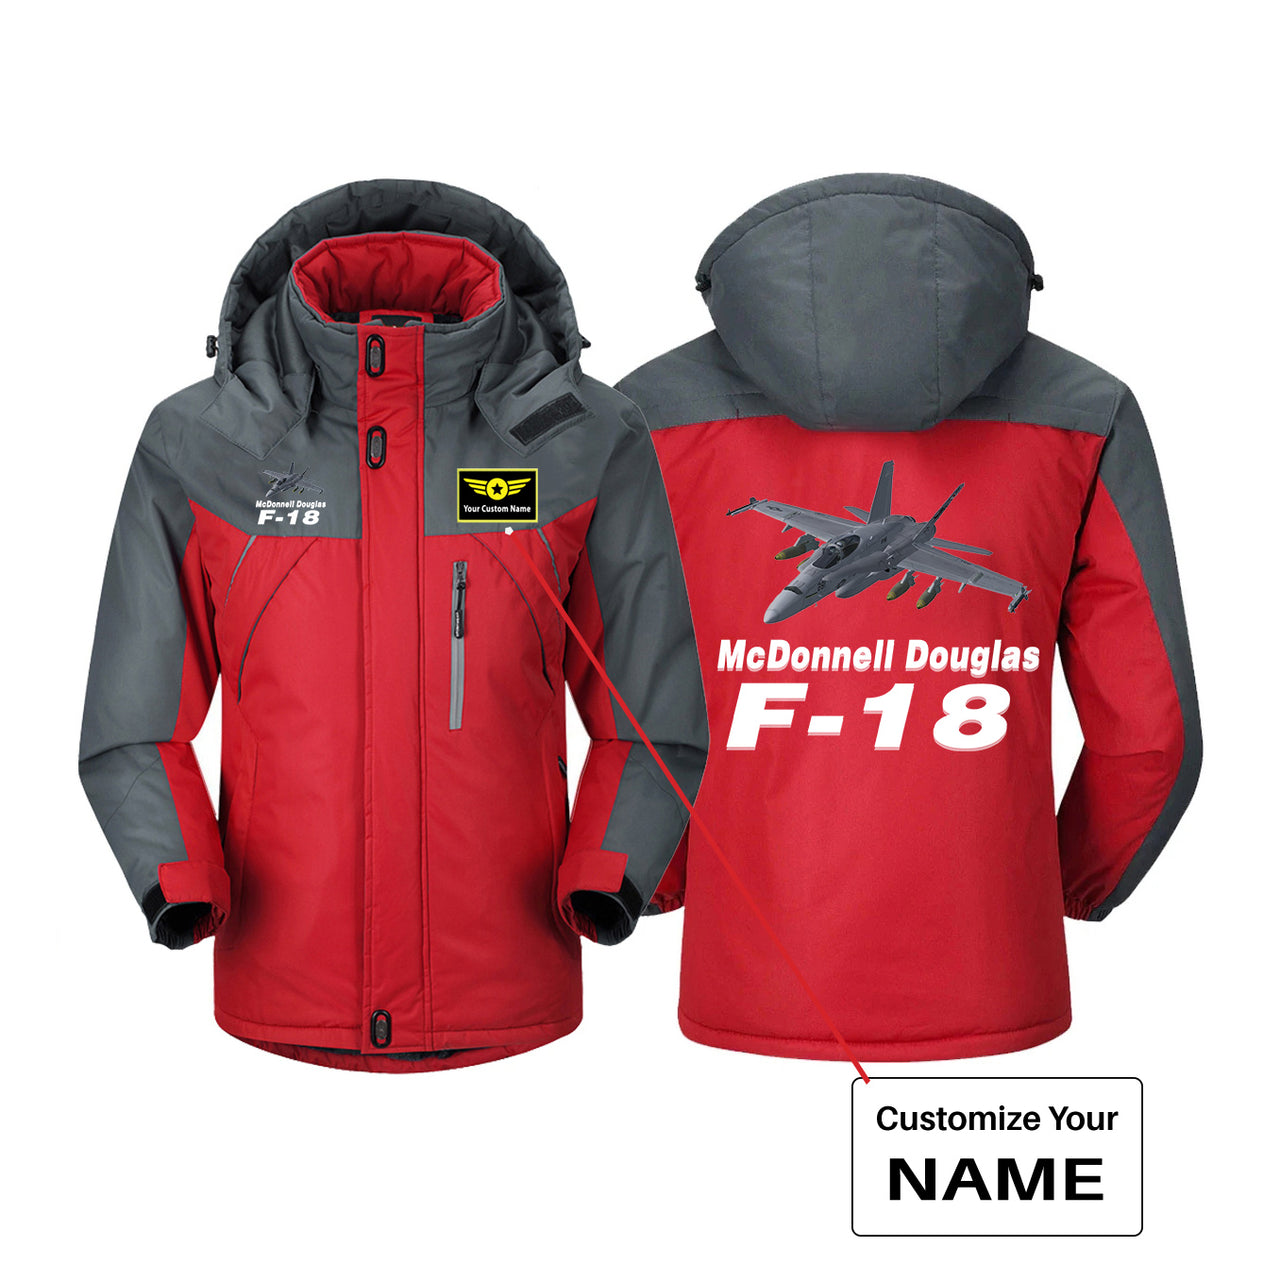 The McDonnell Douglas F18 Designed Thick Winter Jackets